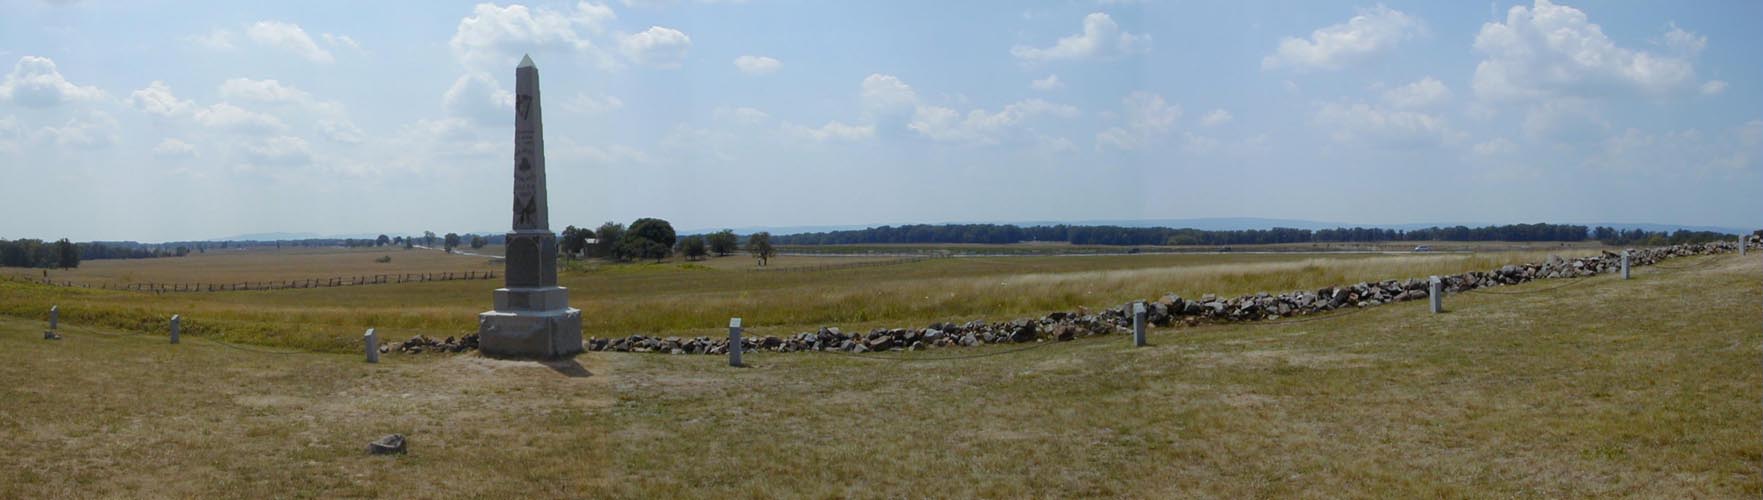 pickett's charge